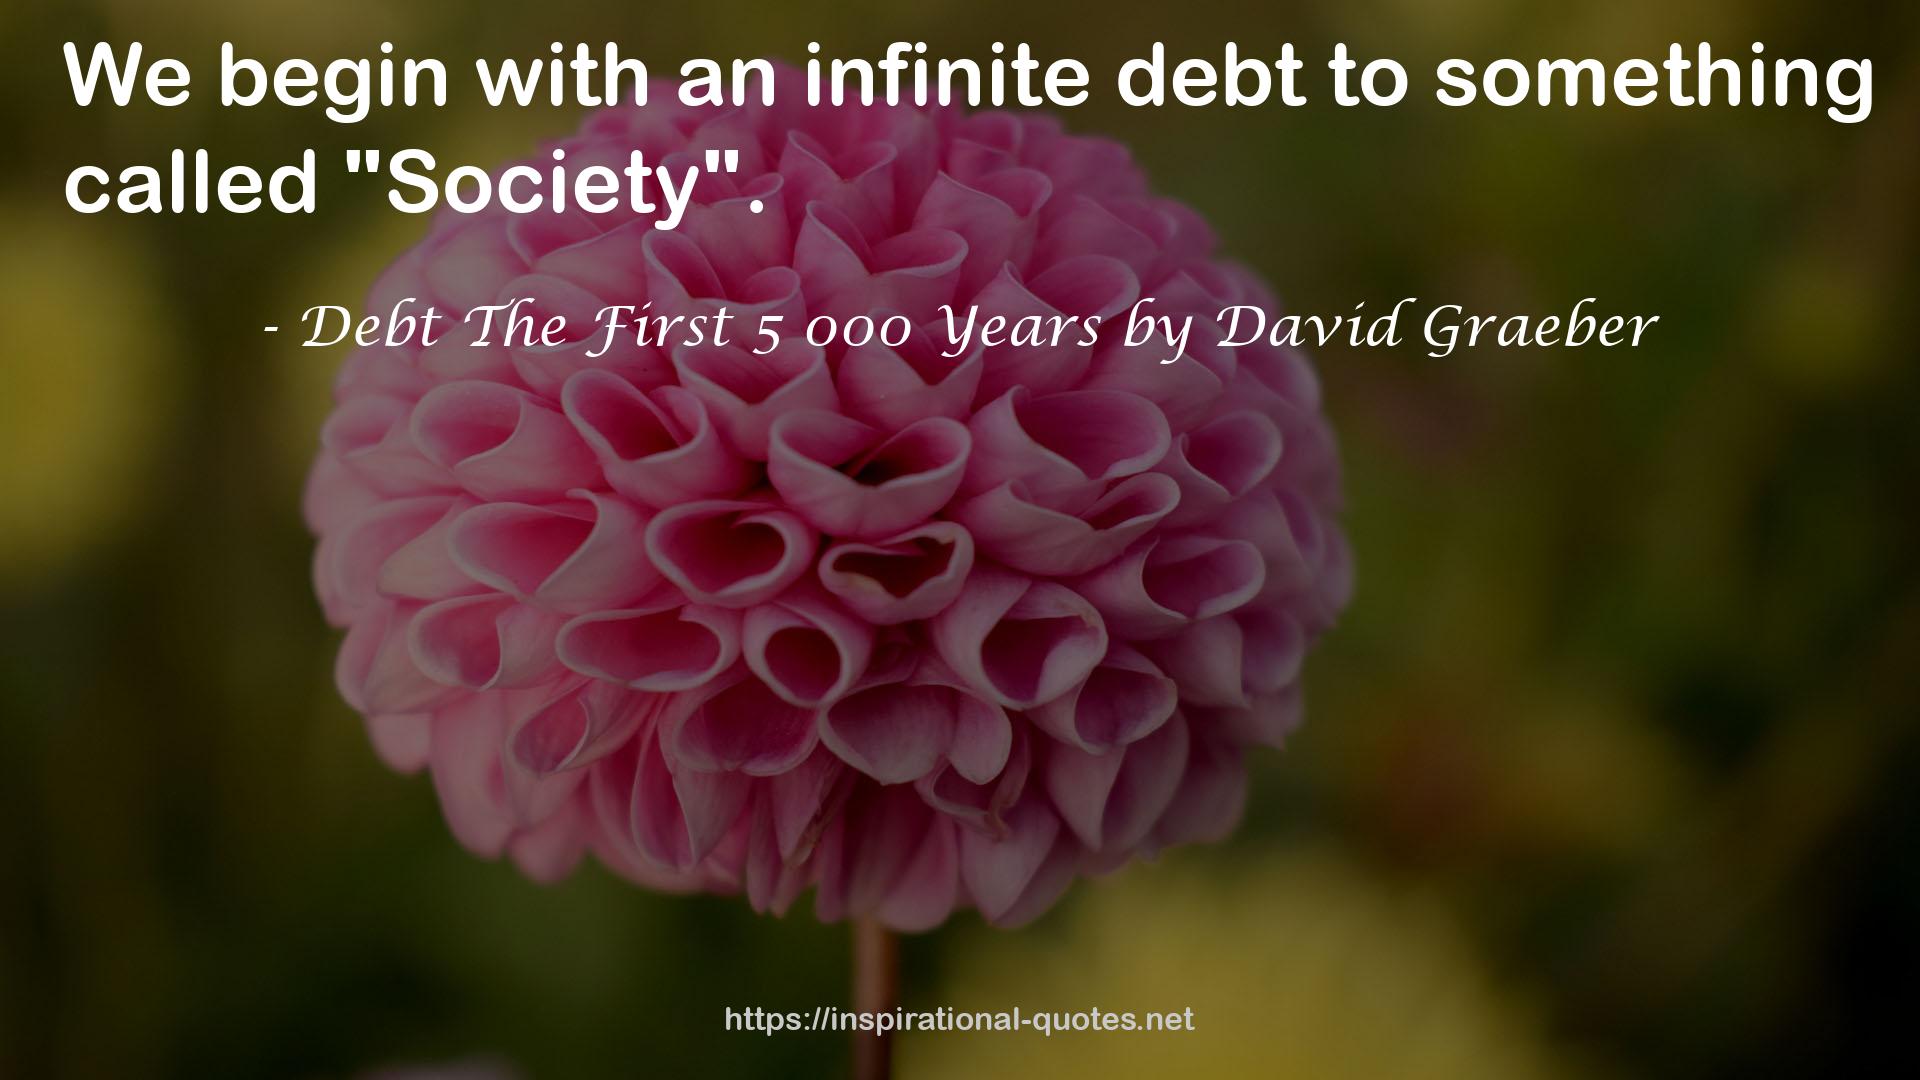 Debt The First 5 000 Years by David Graeber QUOTES